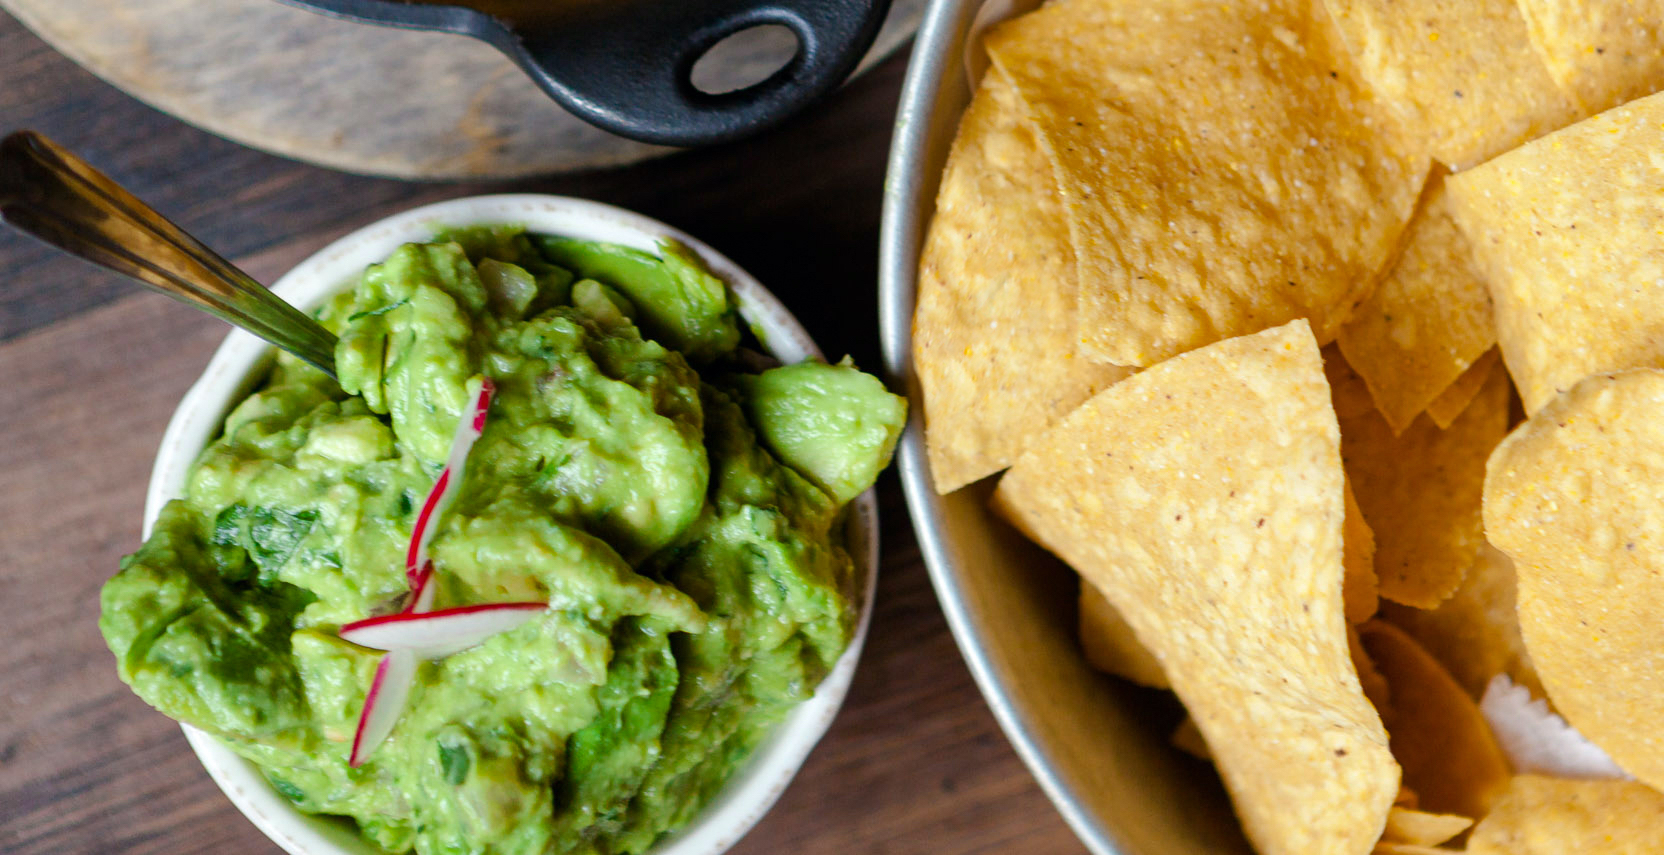 Guacamole and chips from Bakersfield